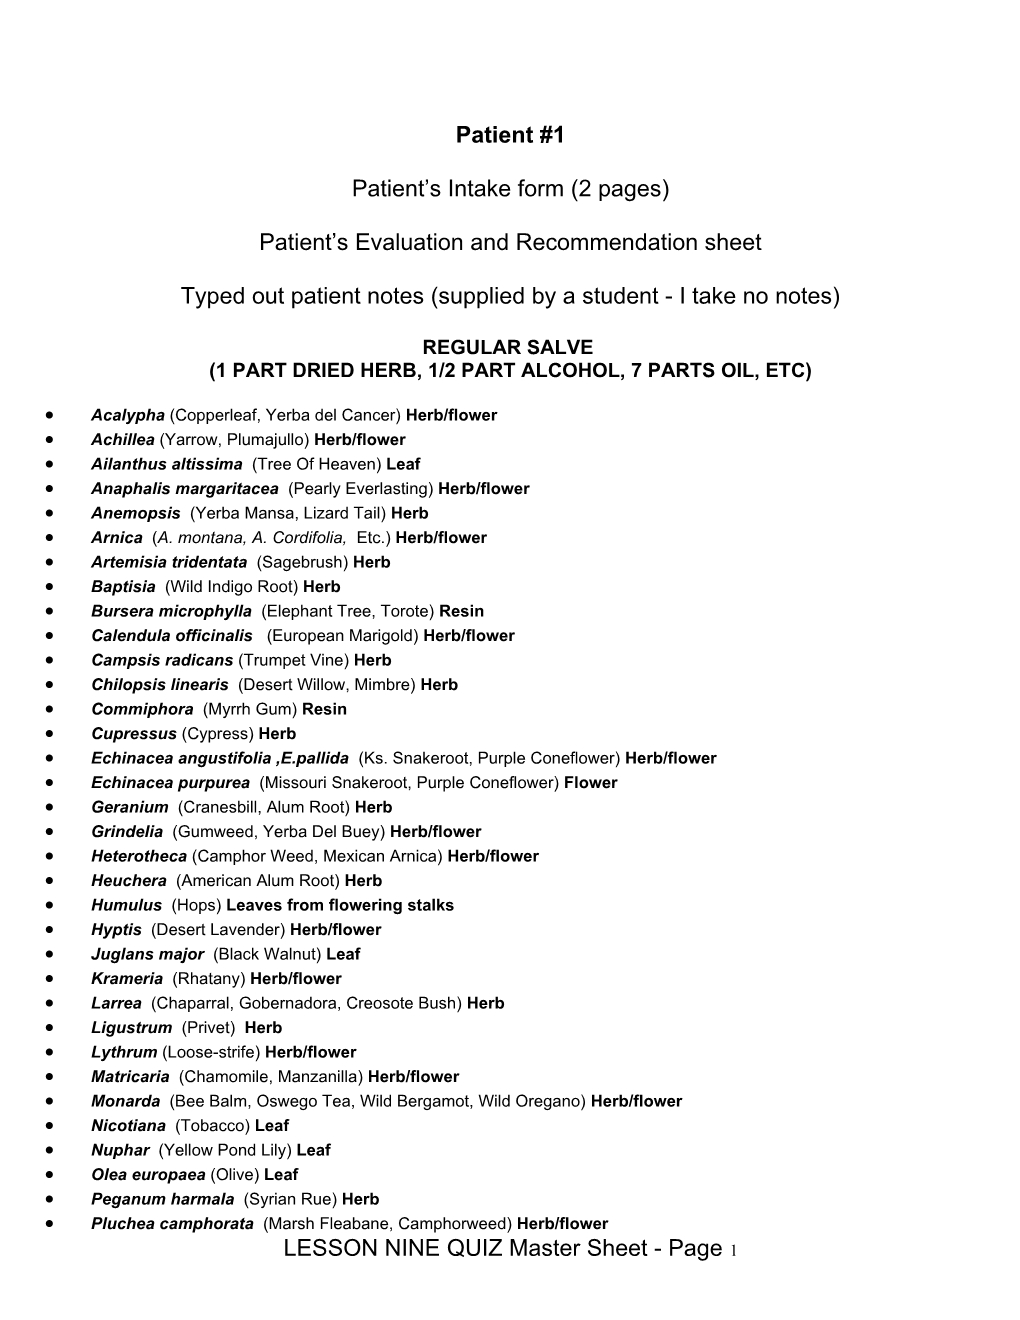 Patient S Intake Form (2 Pages)